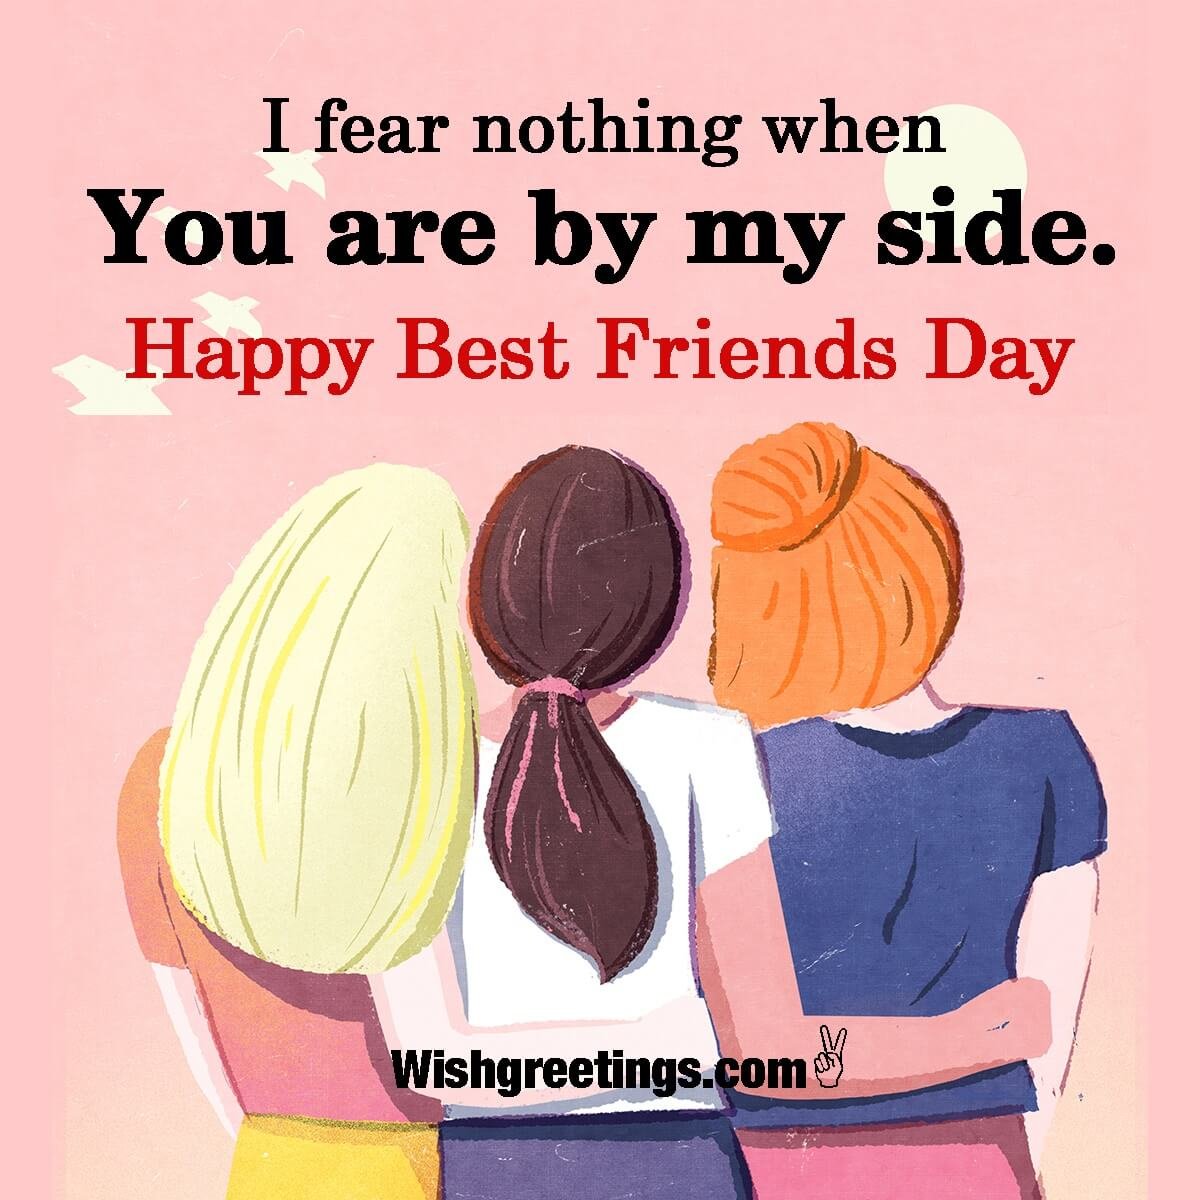 My friends to be glad. Хэппи Дэй френдс. Happy Friendship Day. Best friends Day. Картина friends Day.